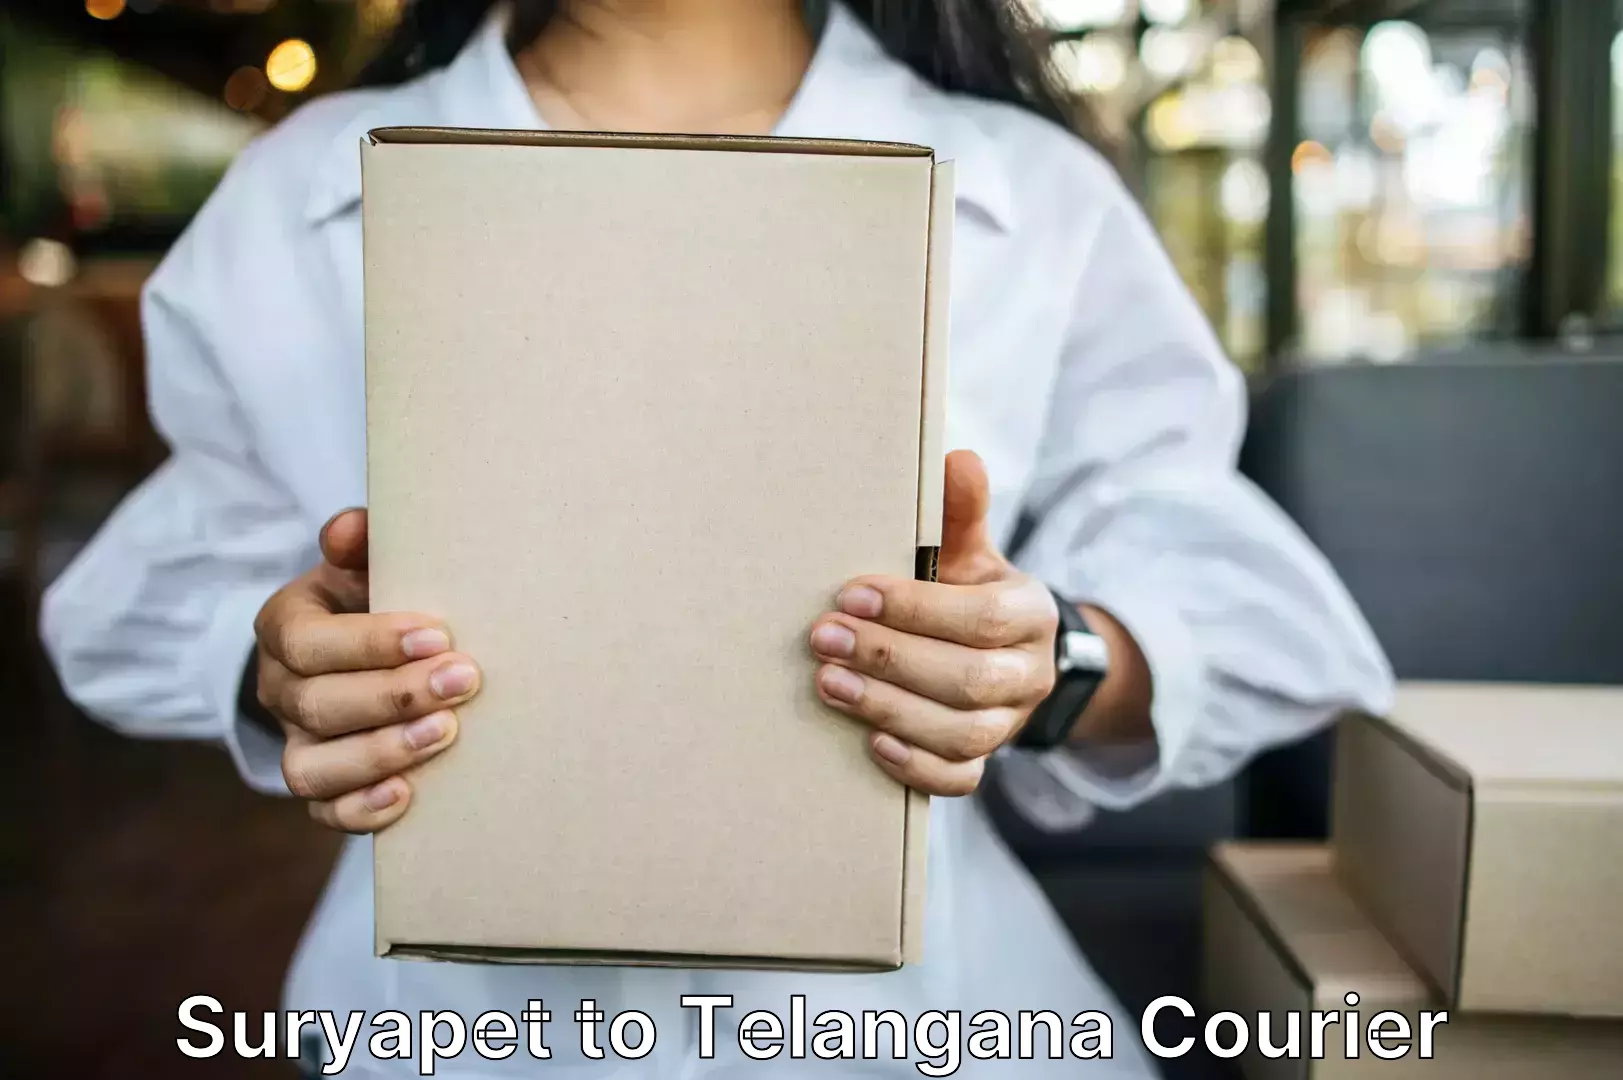 Luggage delivery network Suryapet to Warangal